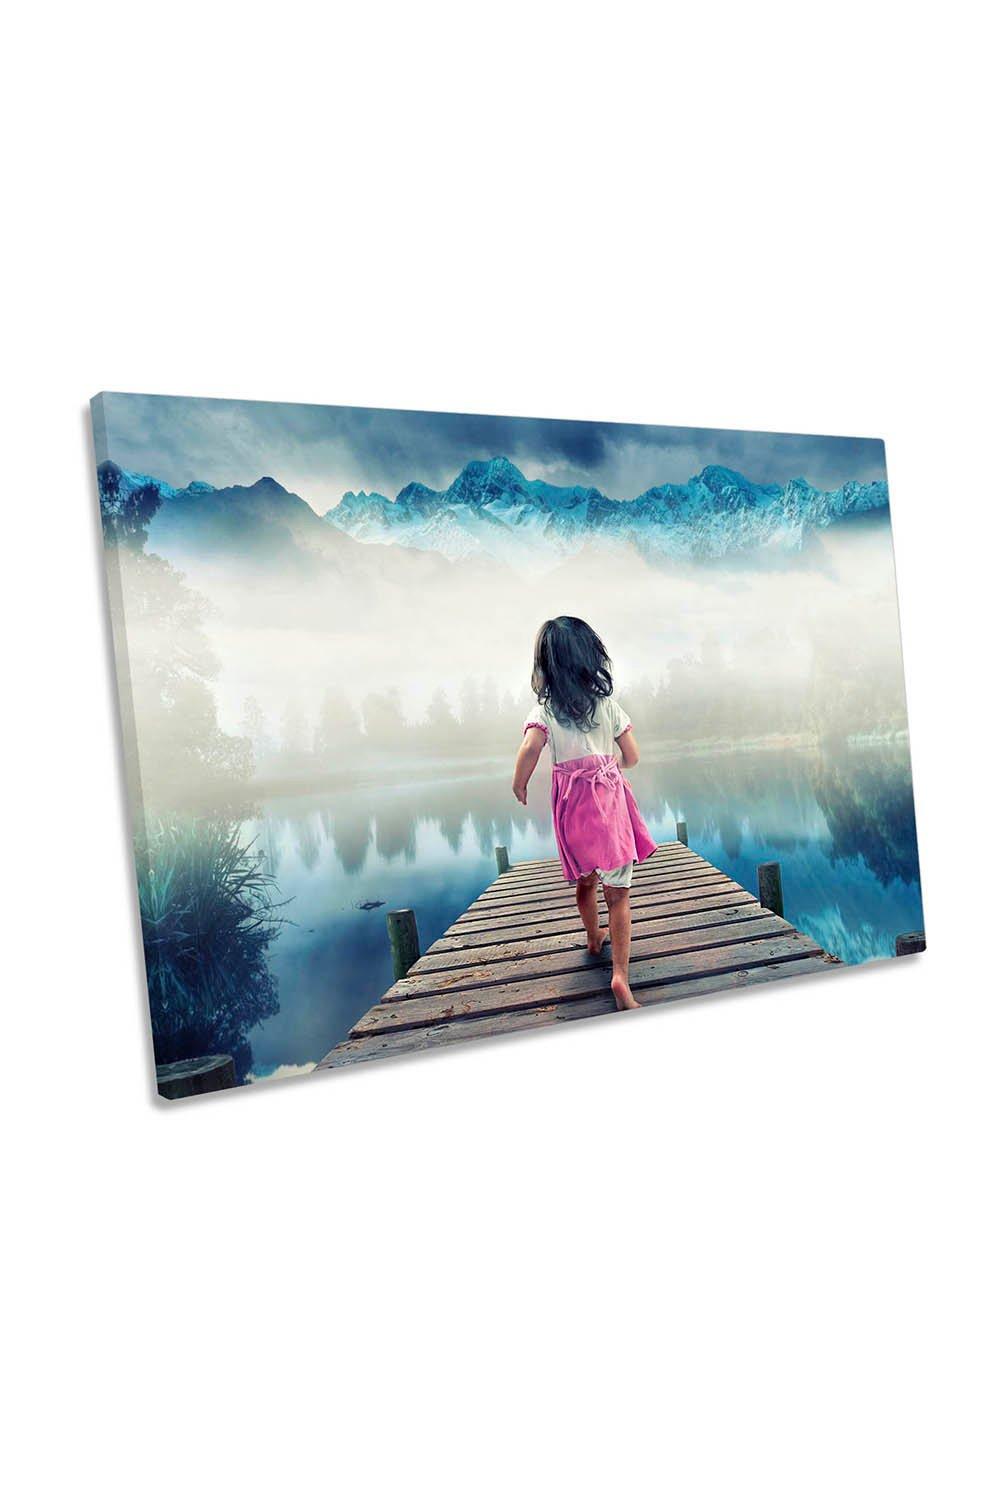 Runaway Pier Jetty Mountains Canvas Wall Art Picture Print